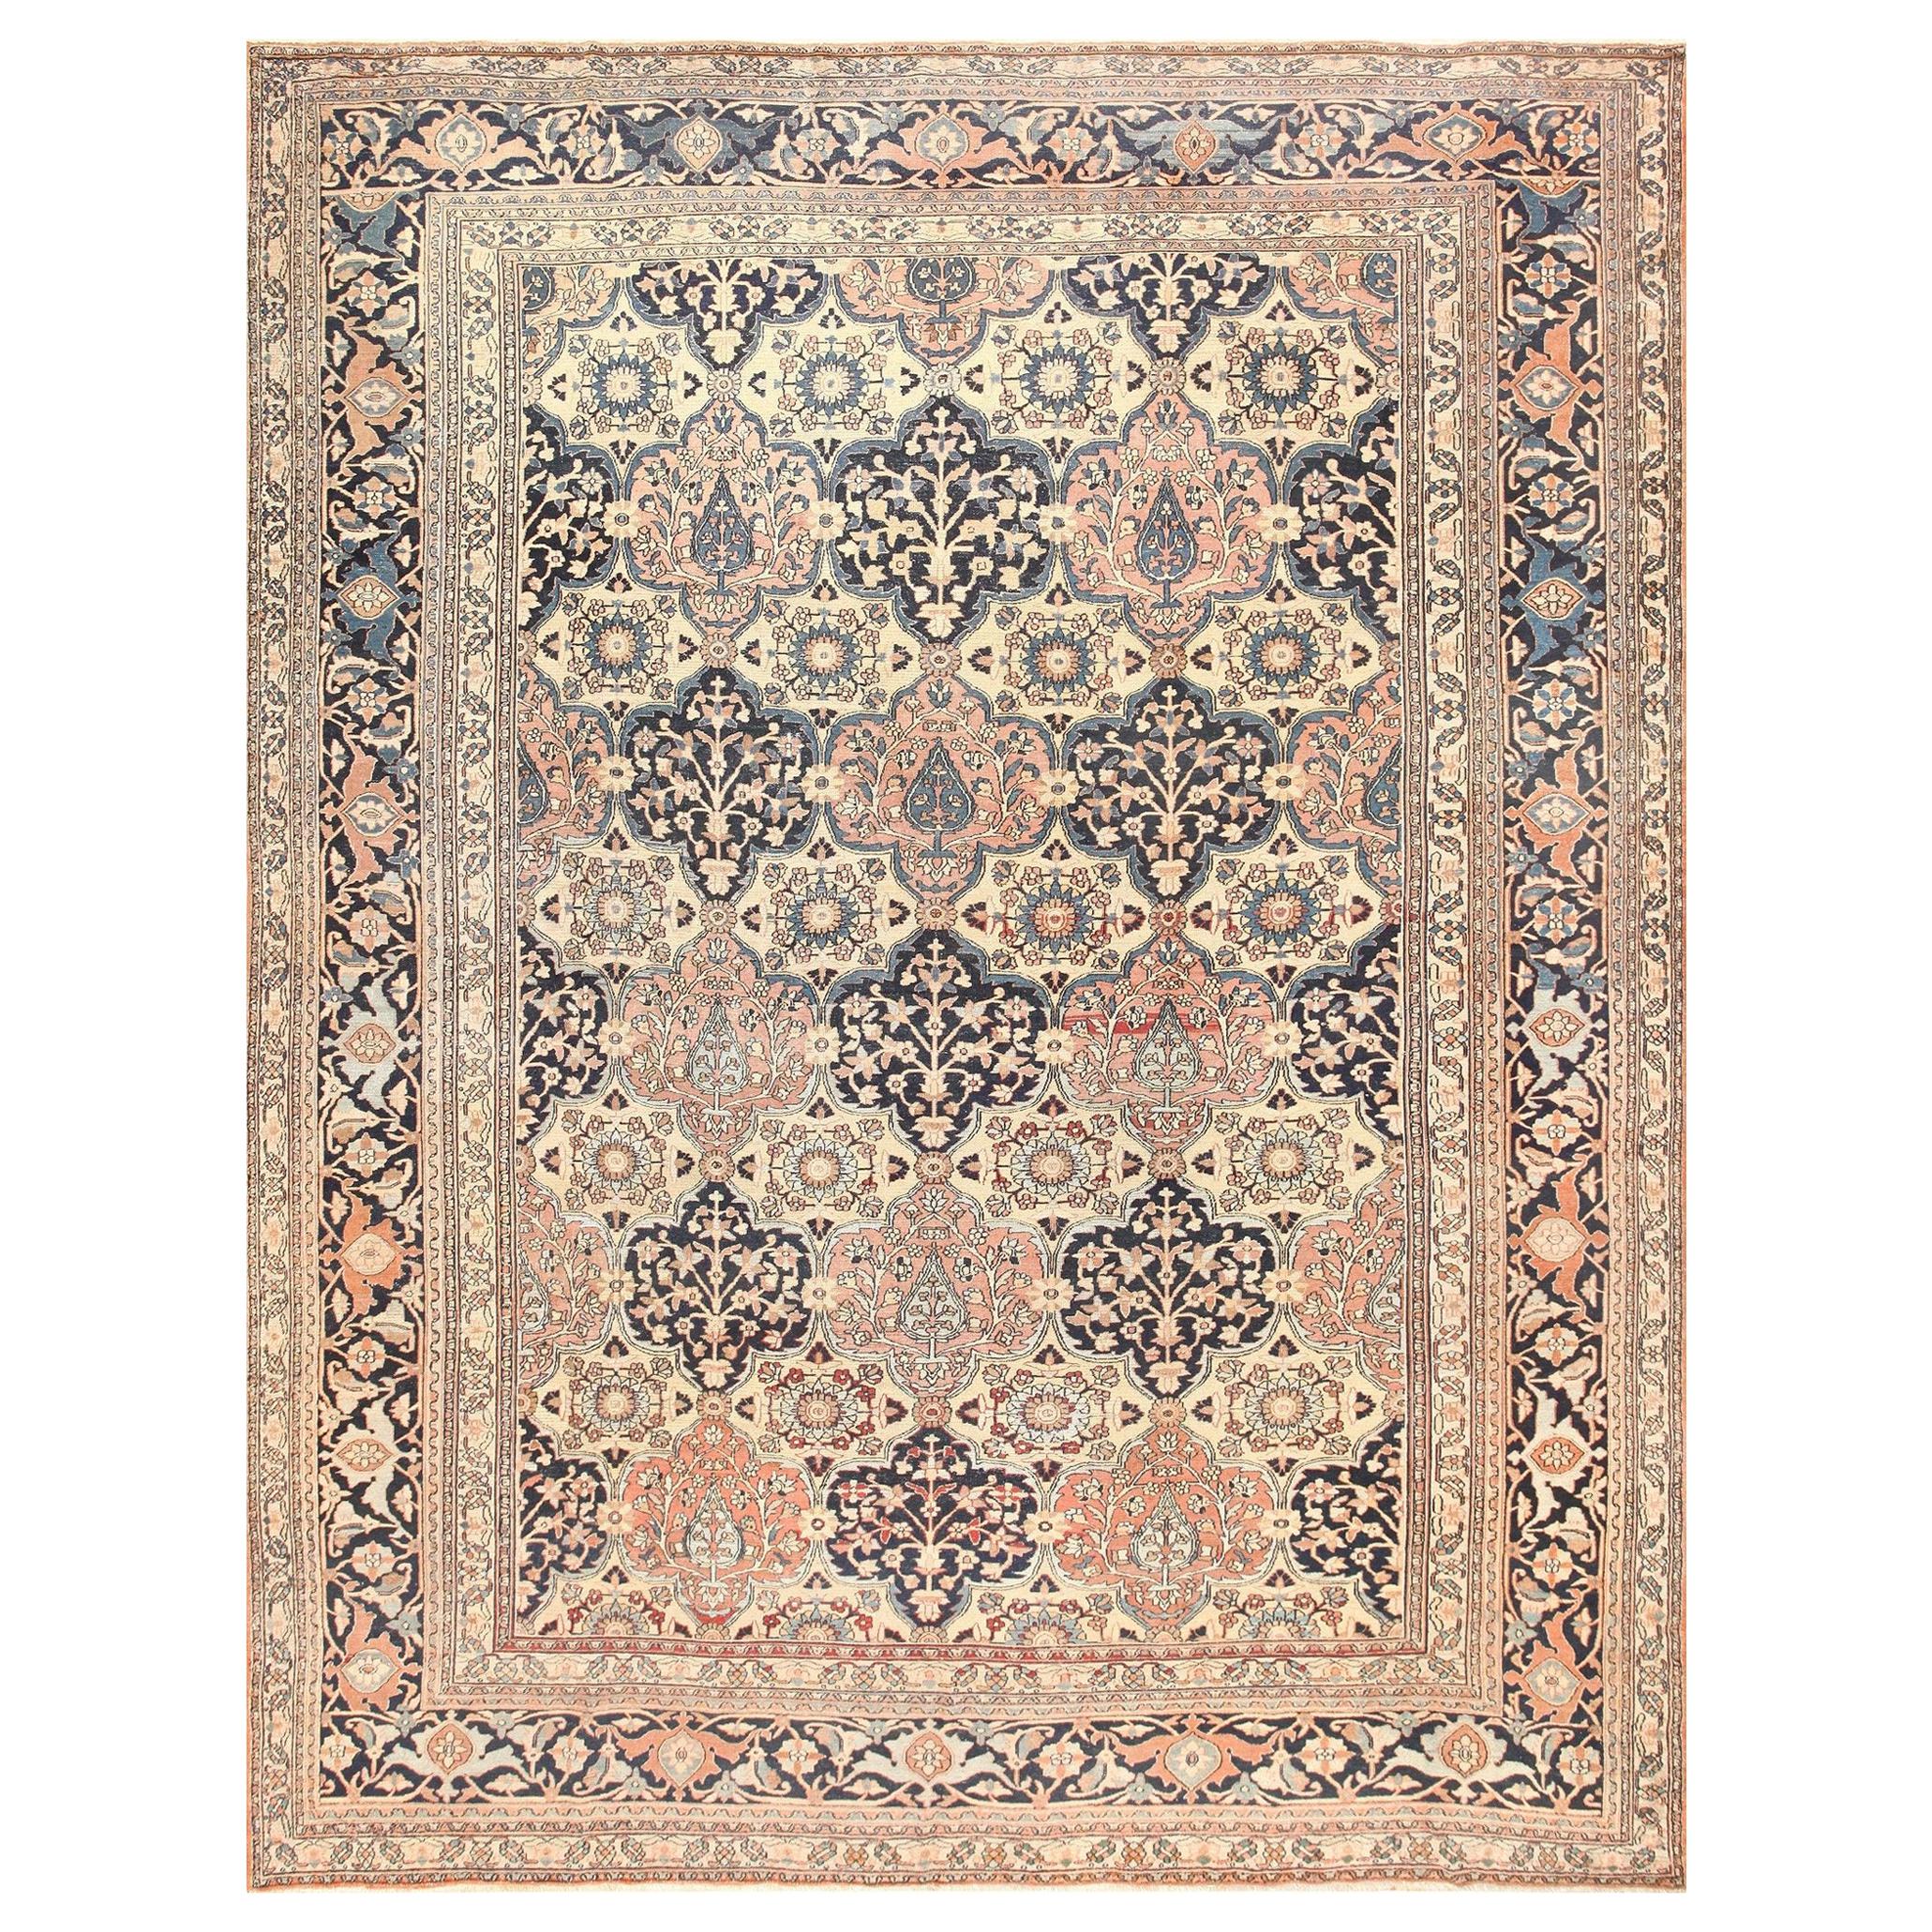 Antique Persian Khorassan Rug. Size: 12 ft 4 in x 15 ft 9 in (3.76 m x 4.8 m)